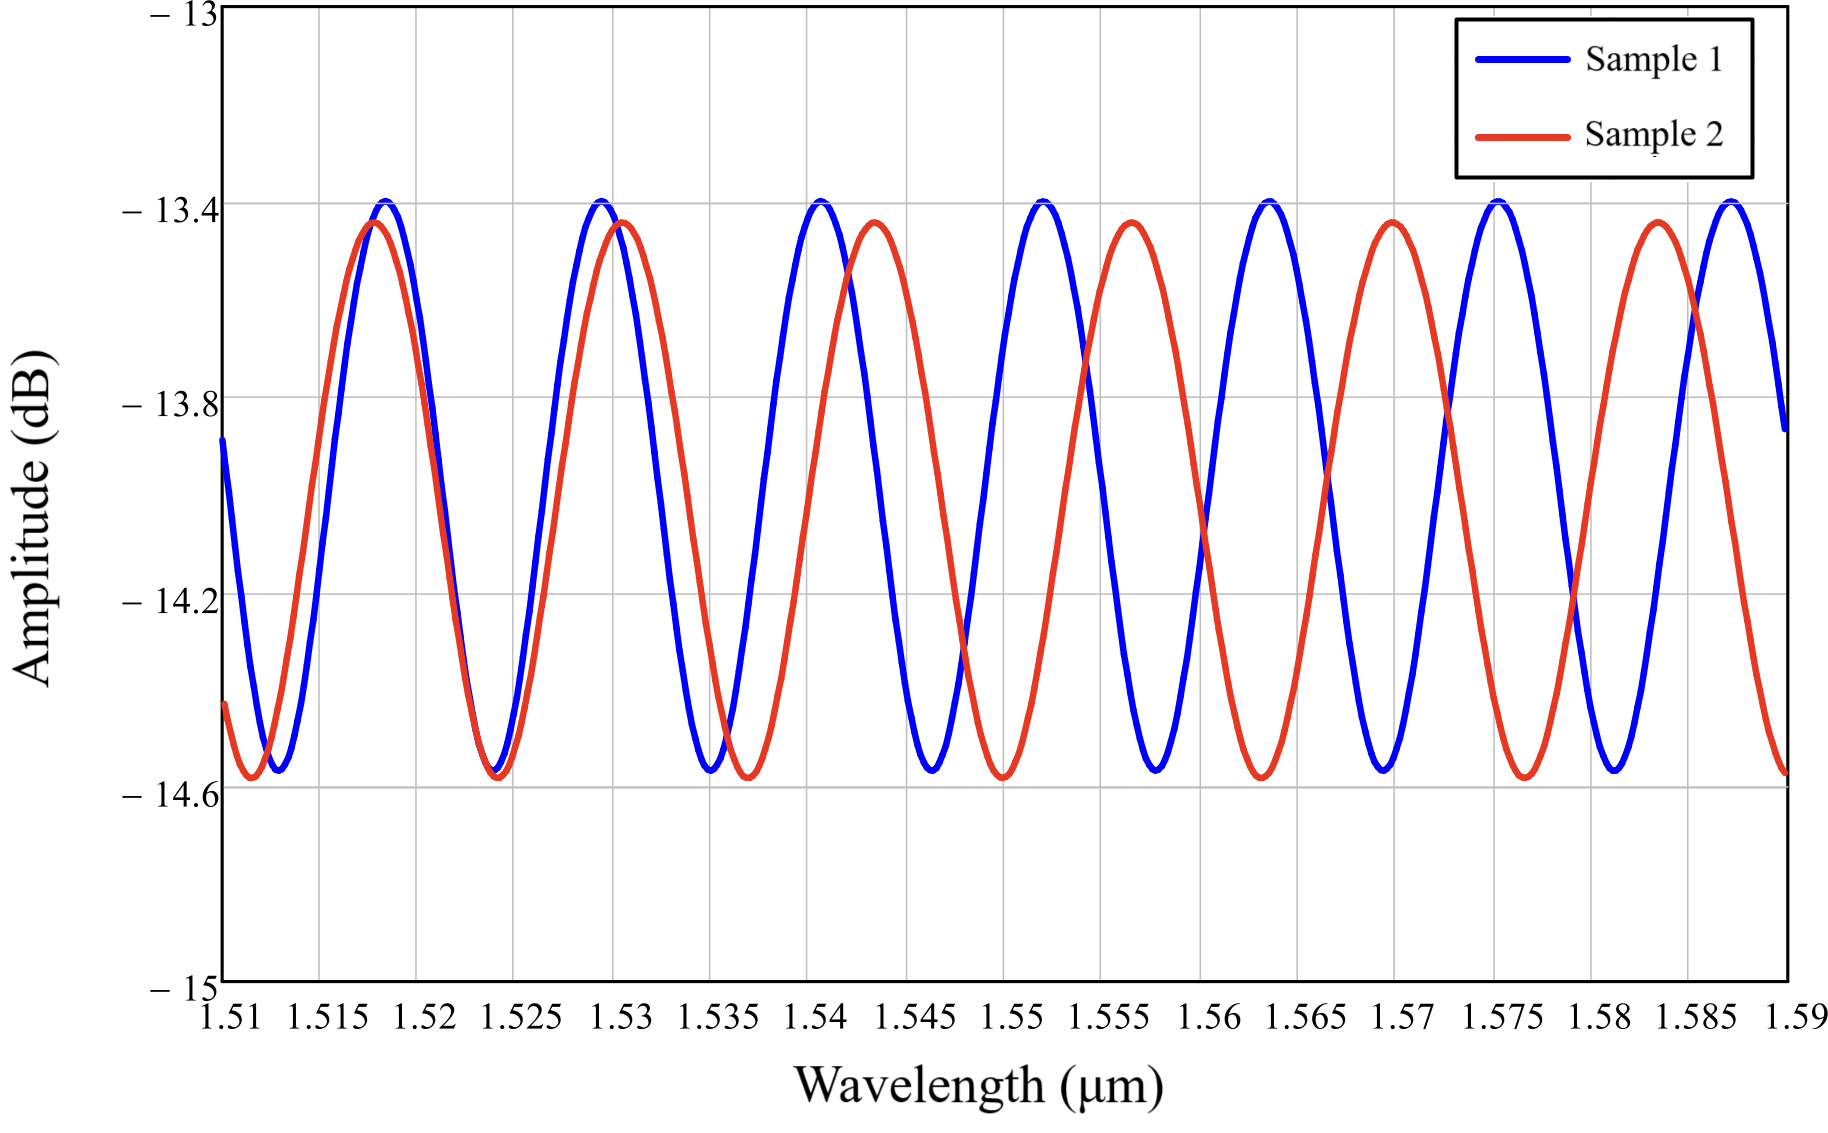 Spectral reflection responses of the Fabry-Perot interferometer models at a temperature of 23 °C